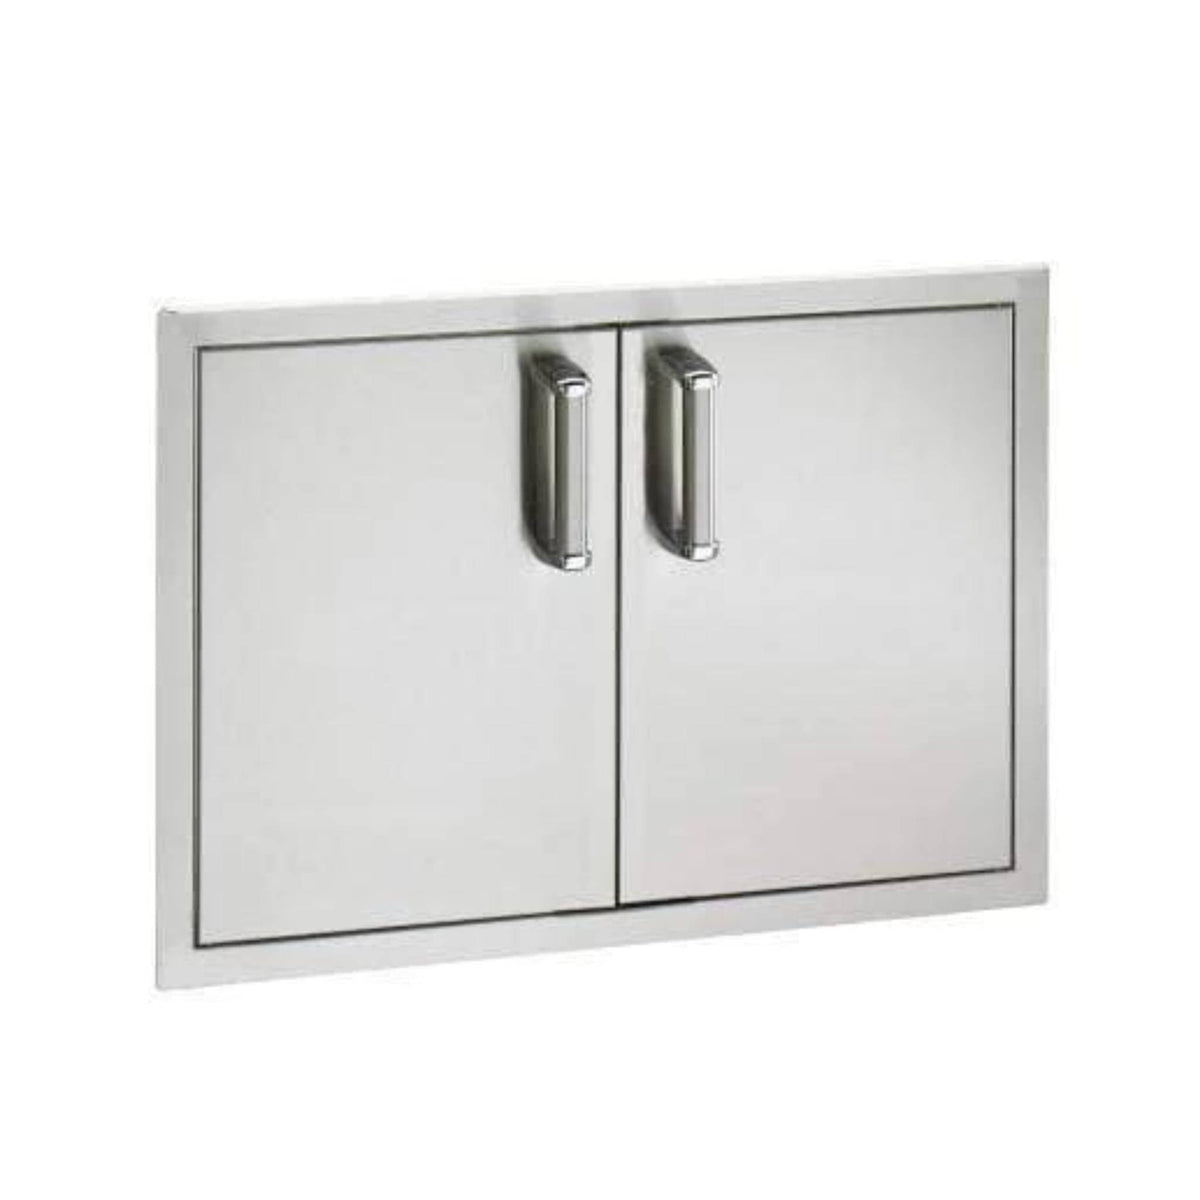 Fire Magic Double Doors With 2 Dual Drawers 53930SC-22